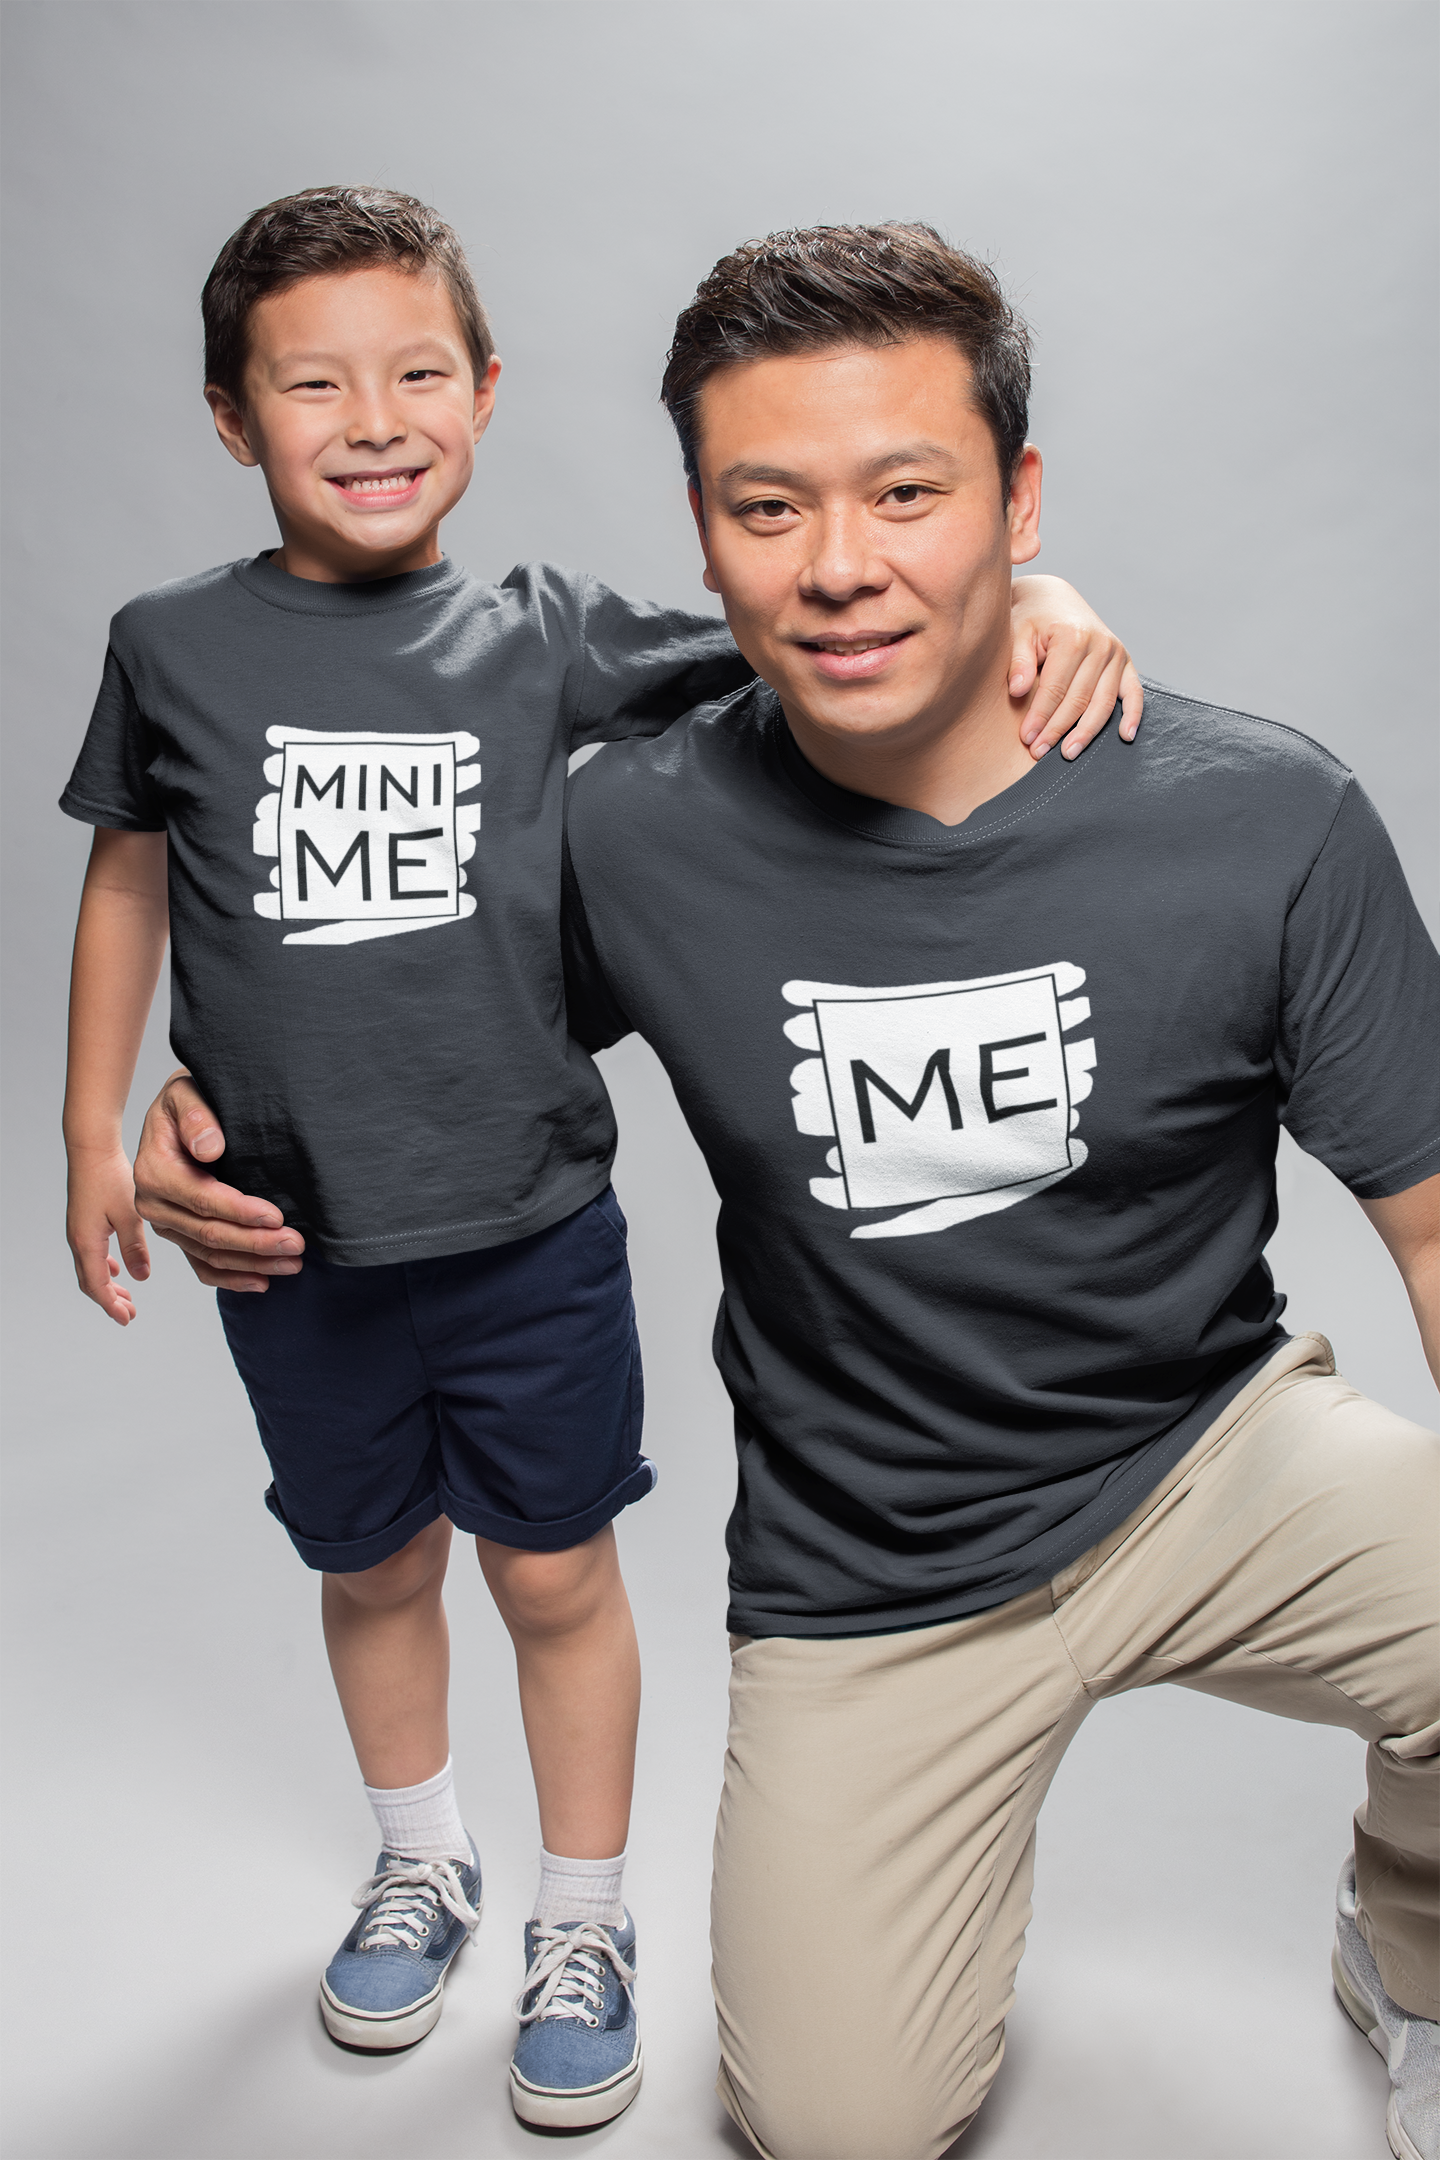 Me Father and Son Black Matching T-Shirt- FunkyTradition